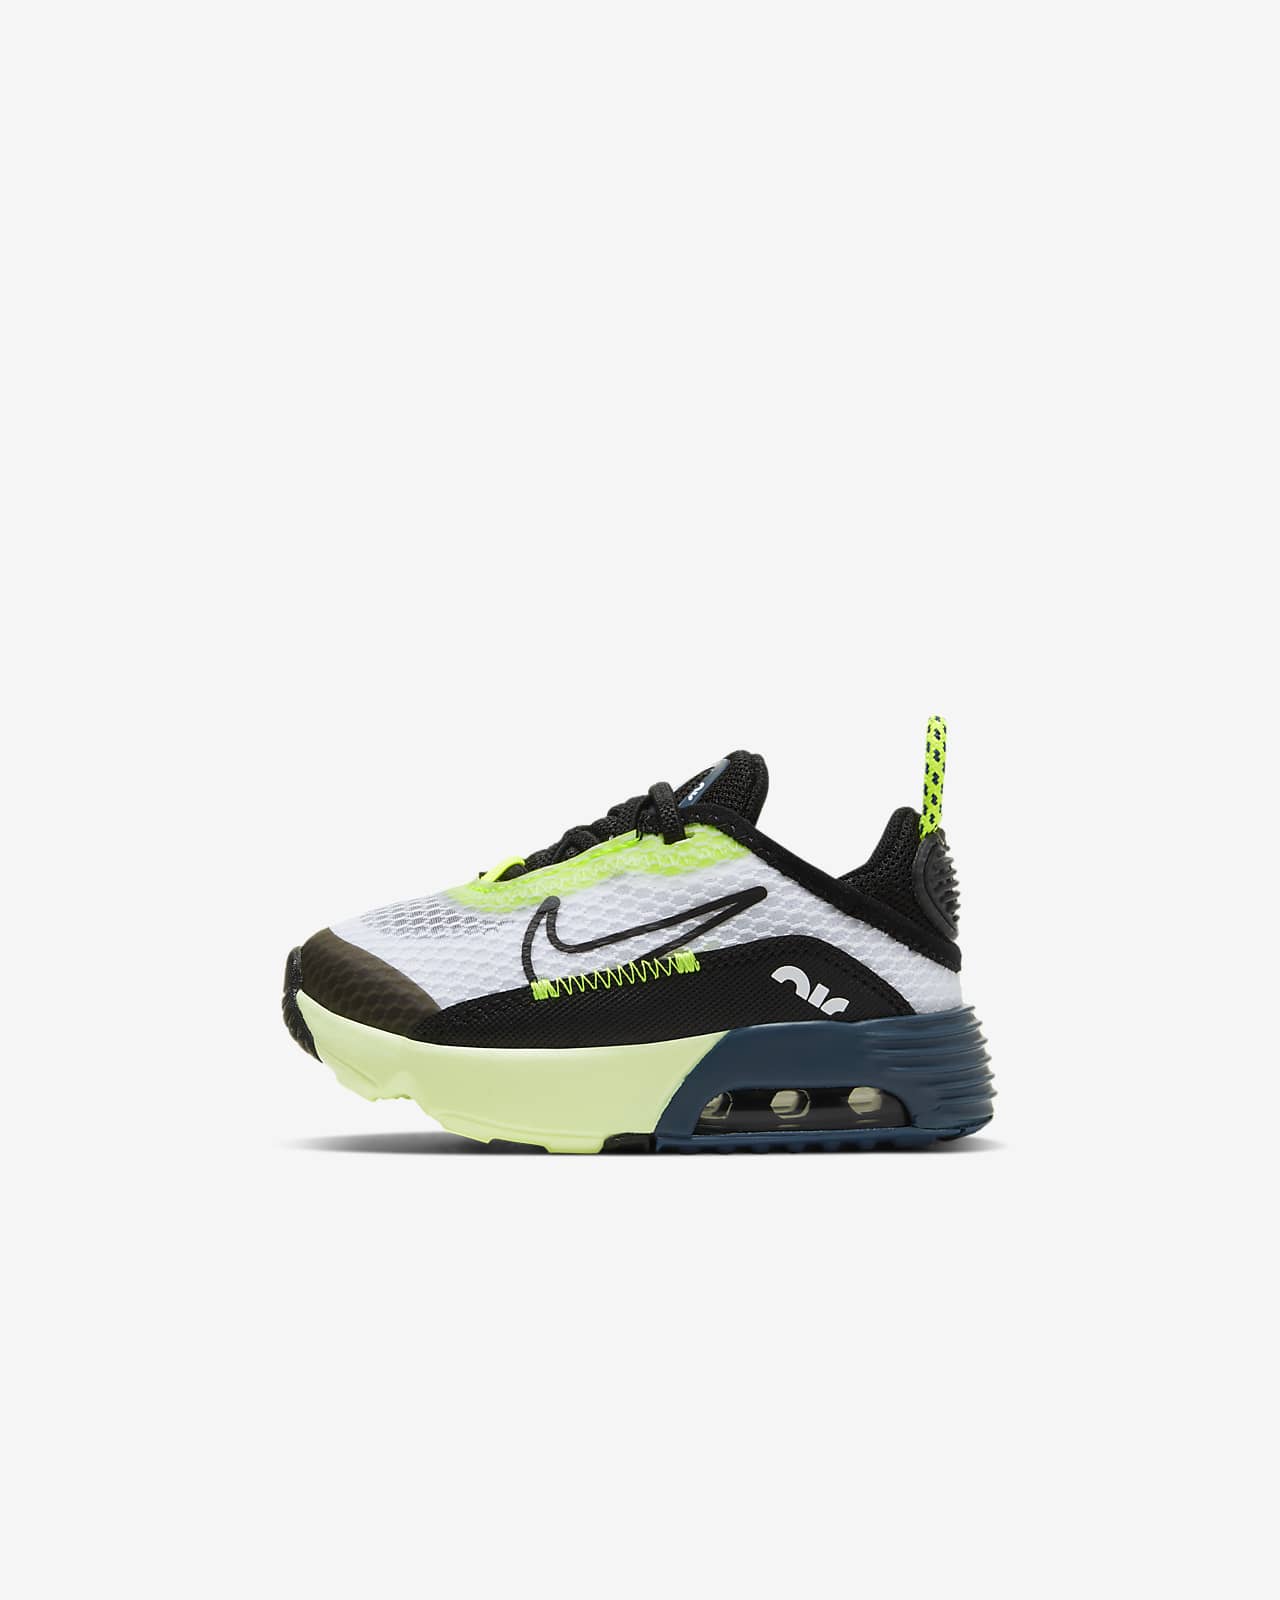 Nike Air Max 2090 Baby and Toddler Shoe 